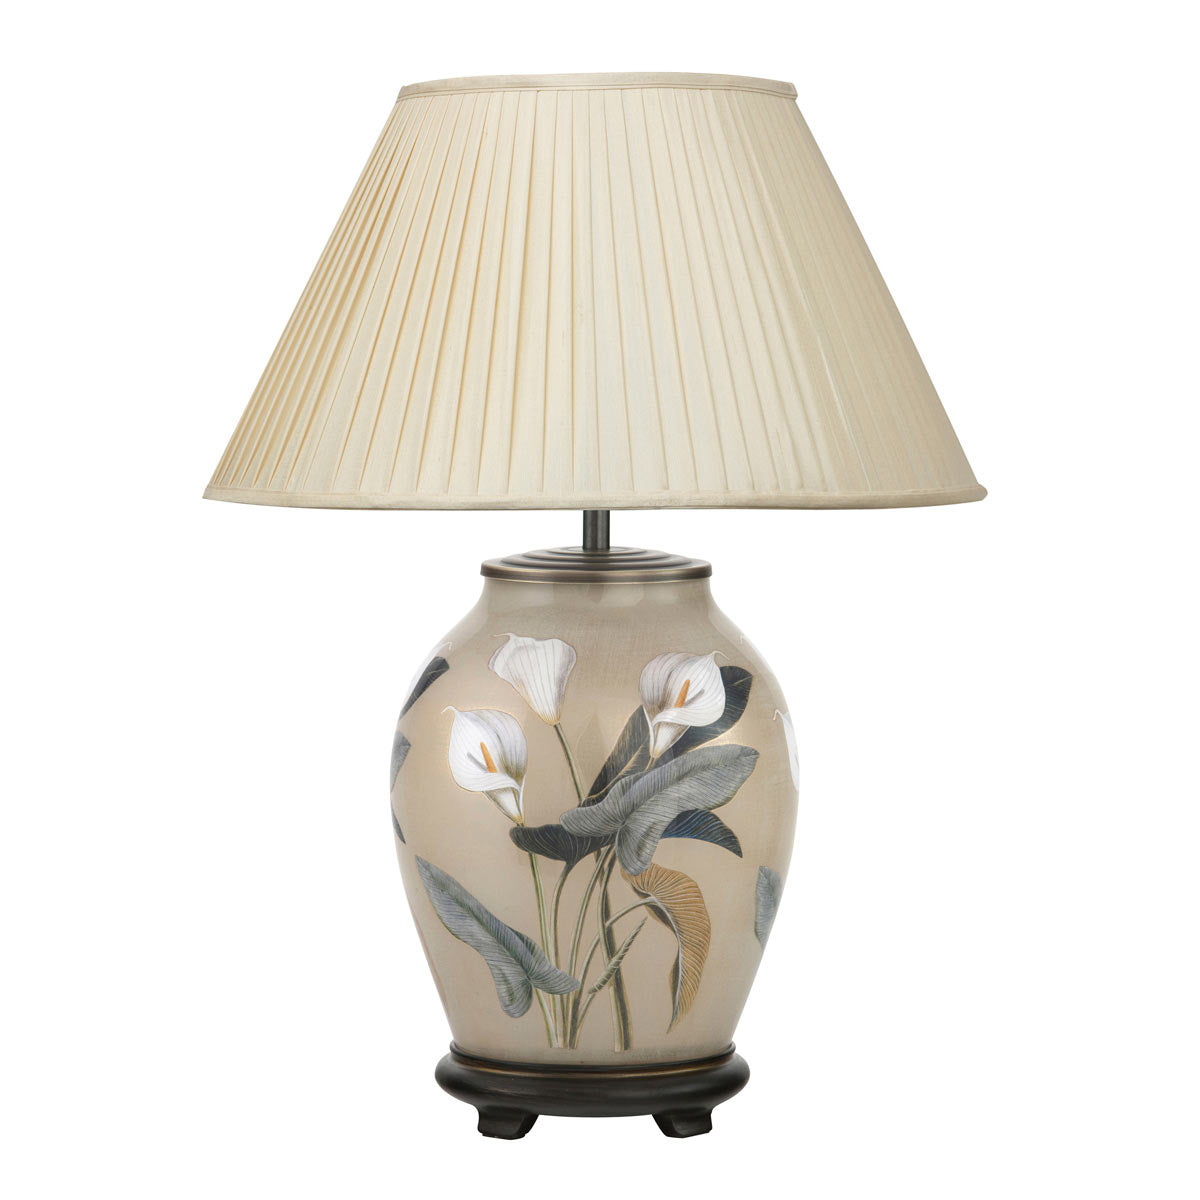 Lily table lamp with empire lampshade